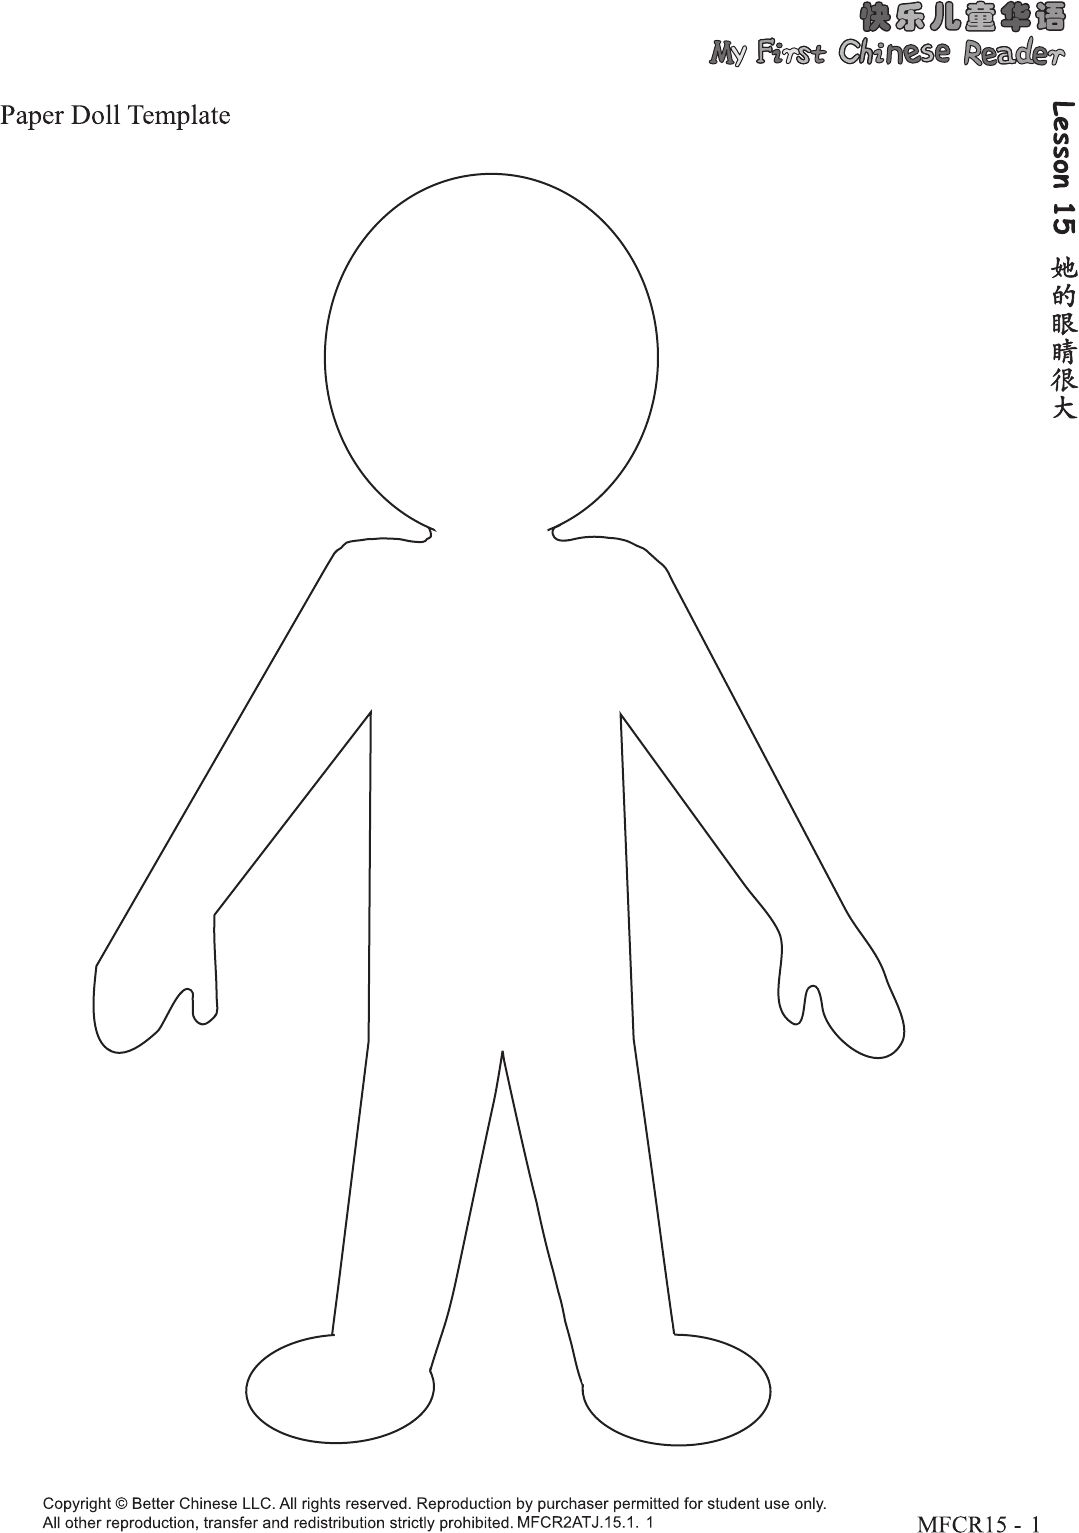 free-paper-doll-template-pdf-575kb-1-page-s